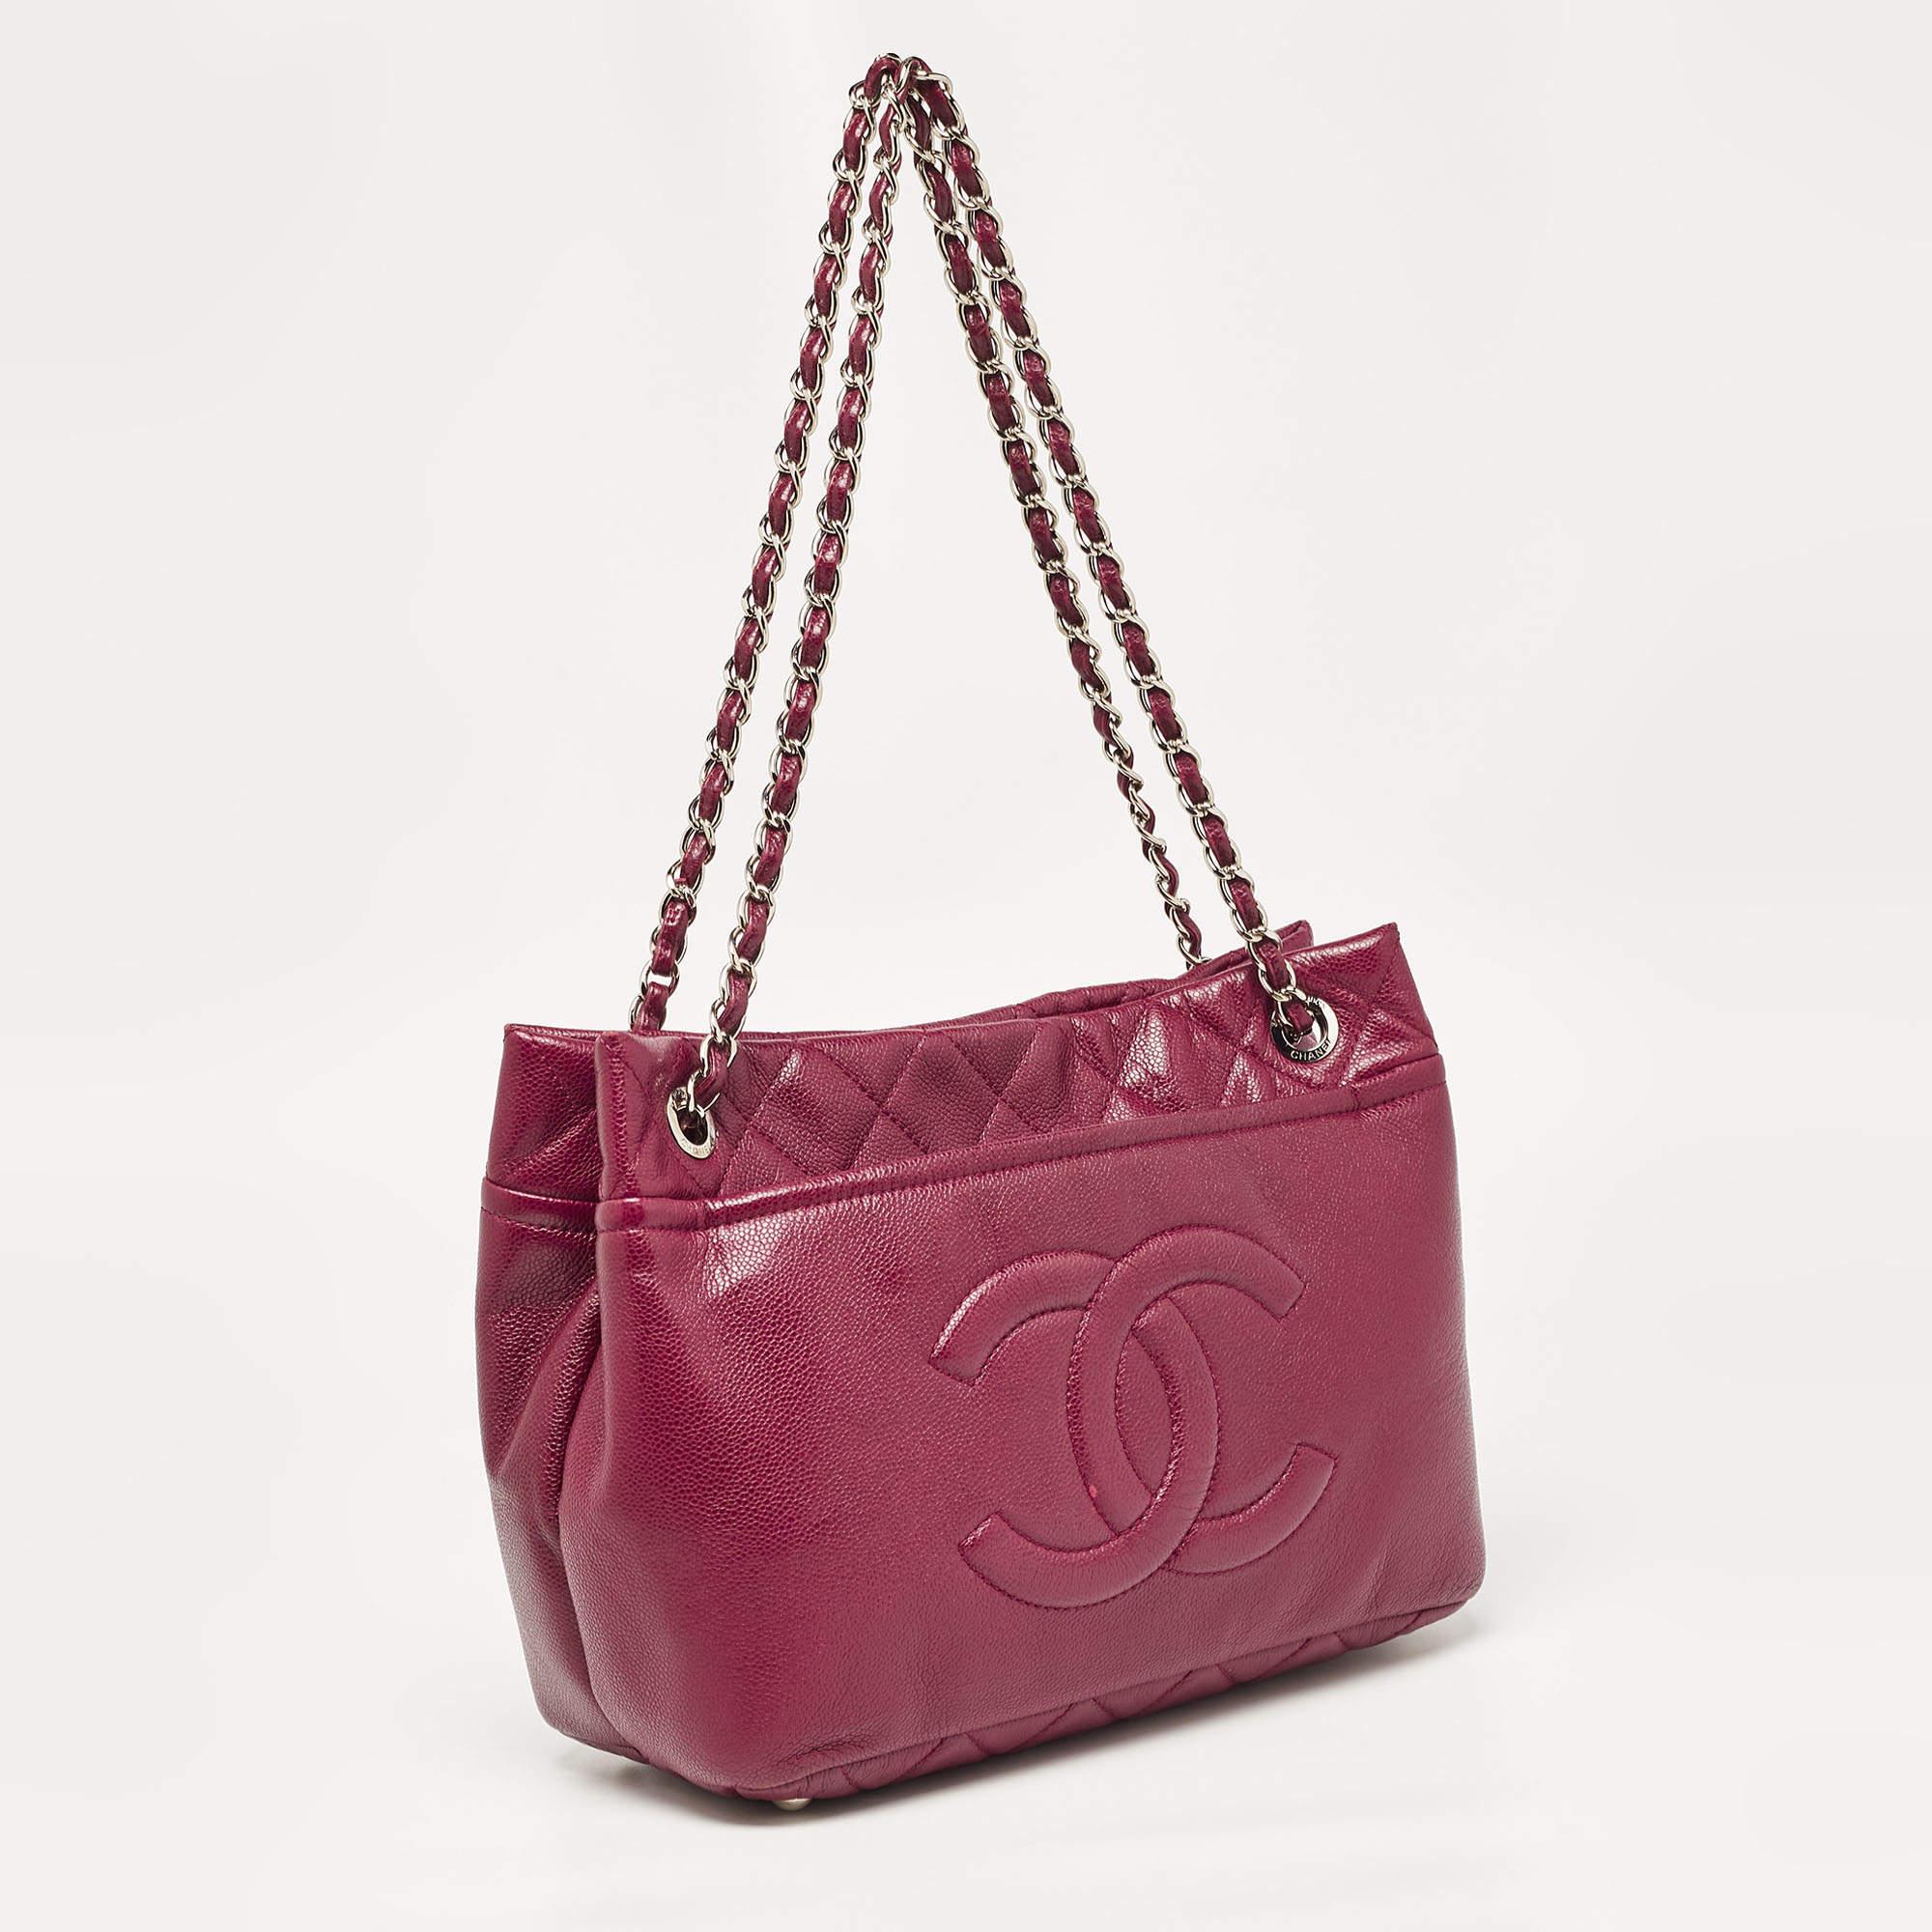 Women's Chanel Dark Red Quilted Caviar Leather CC Timeless Tote